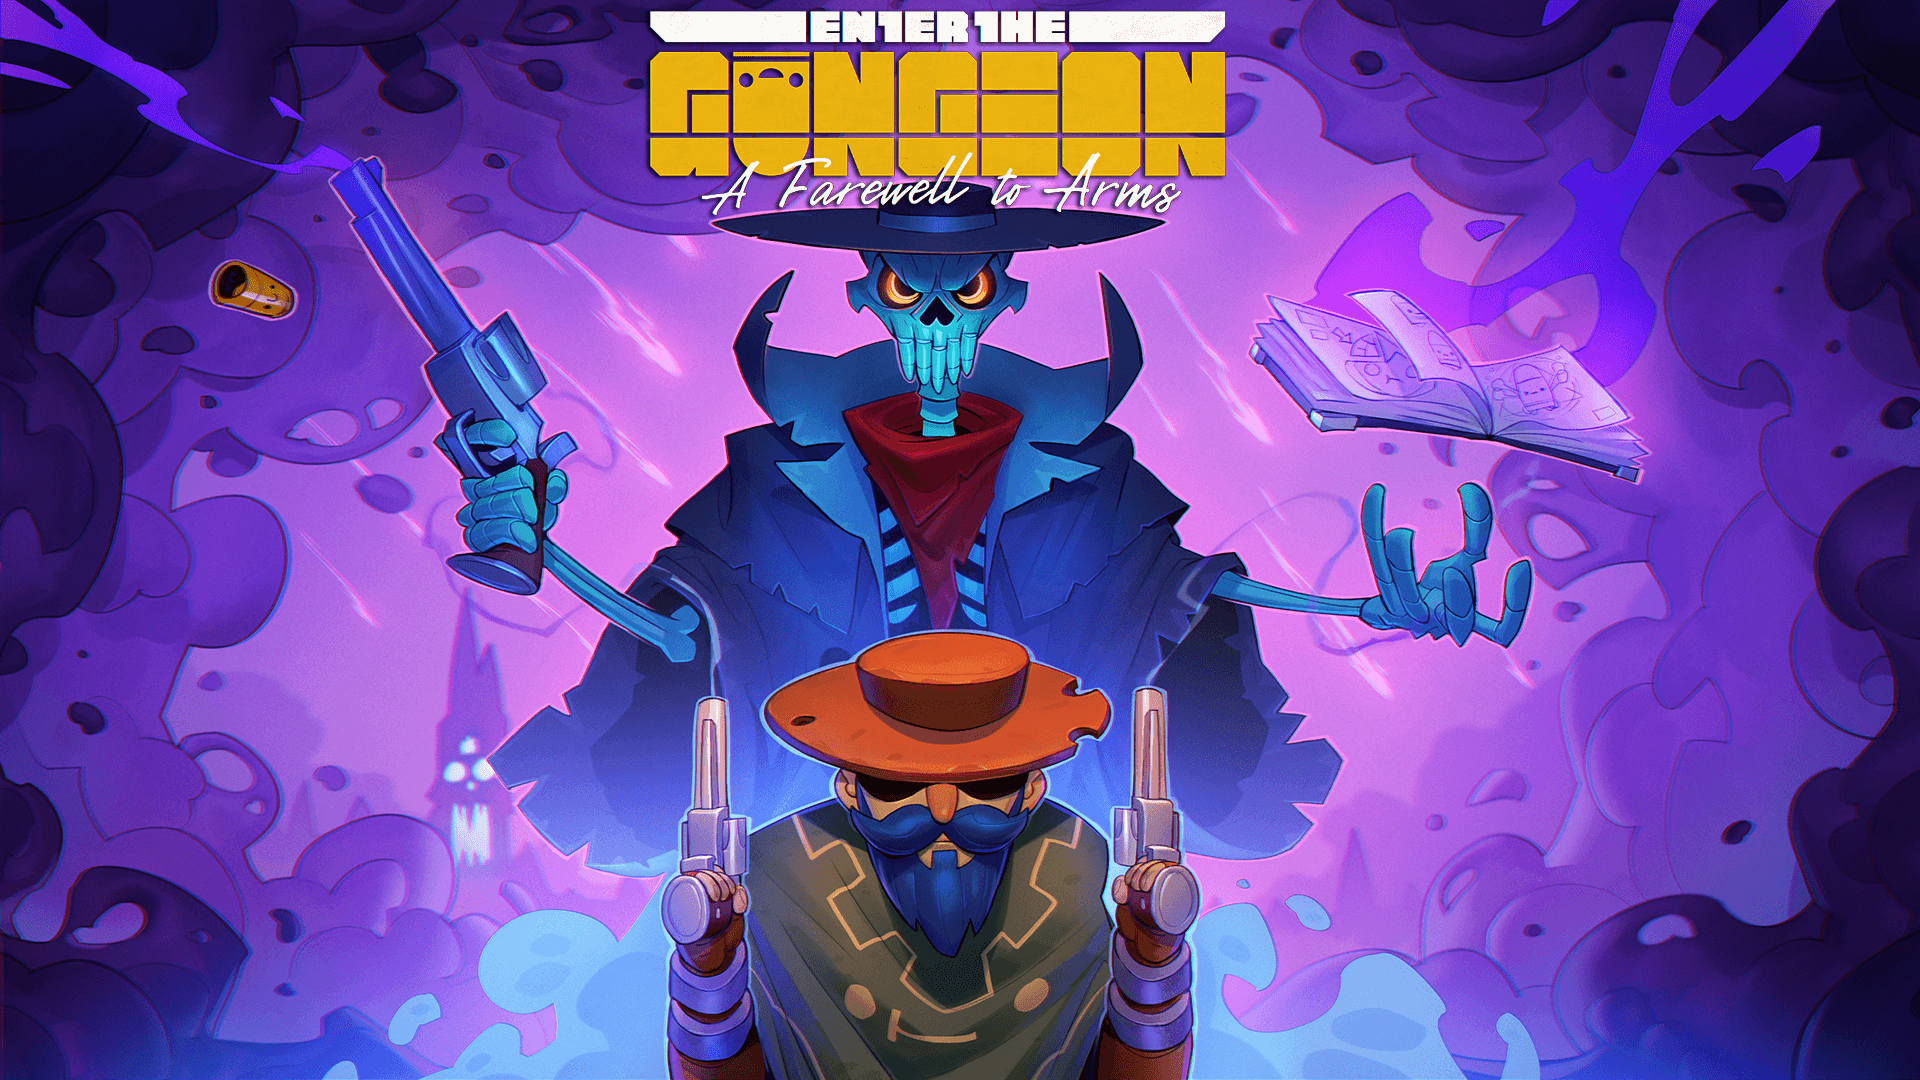 http://www.cosmocover.com/wp-content/uploads/2019/03/Enter-the-Gungeon-A-Farewell-to-Arms_Key-Art.png